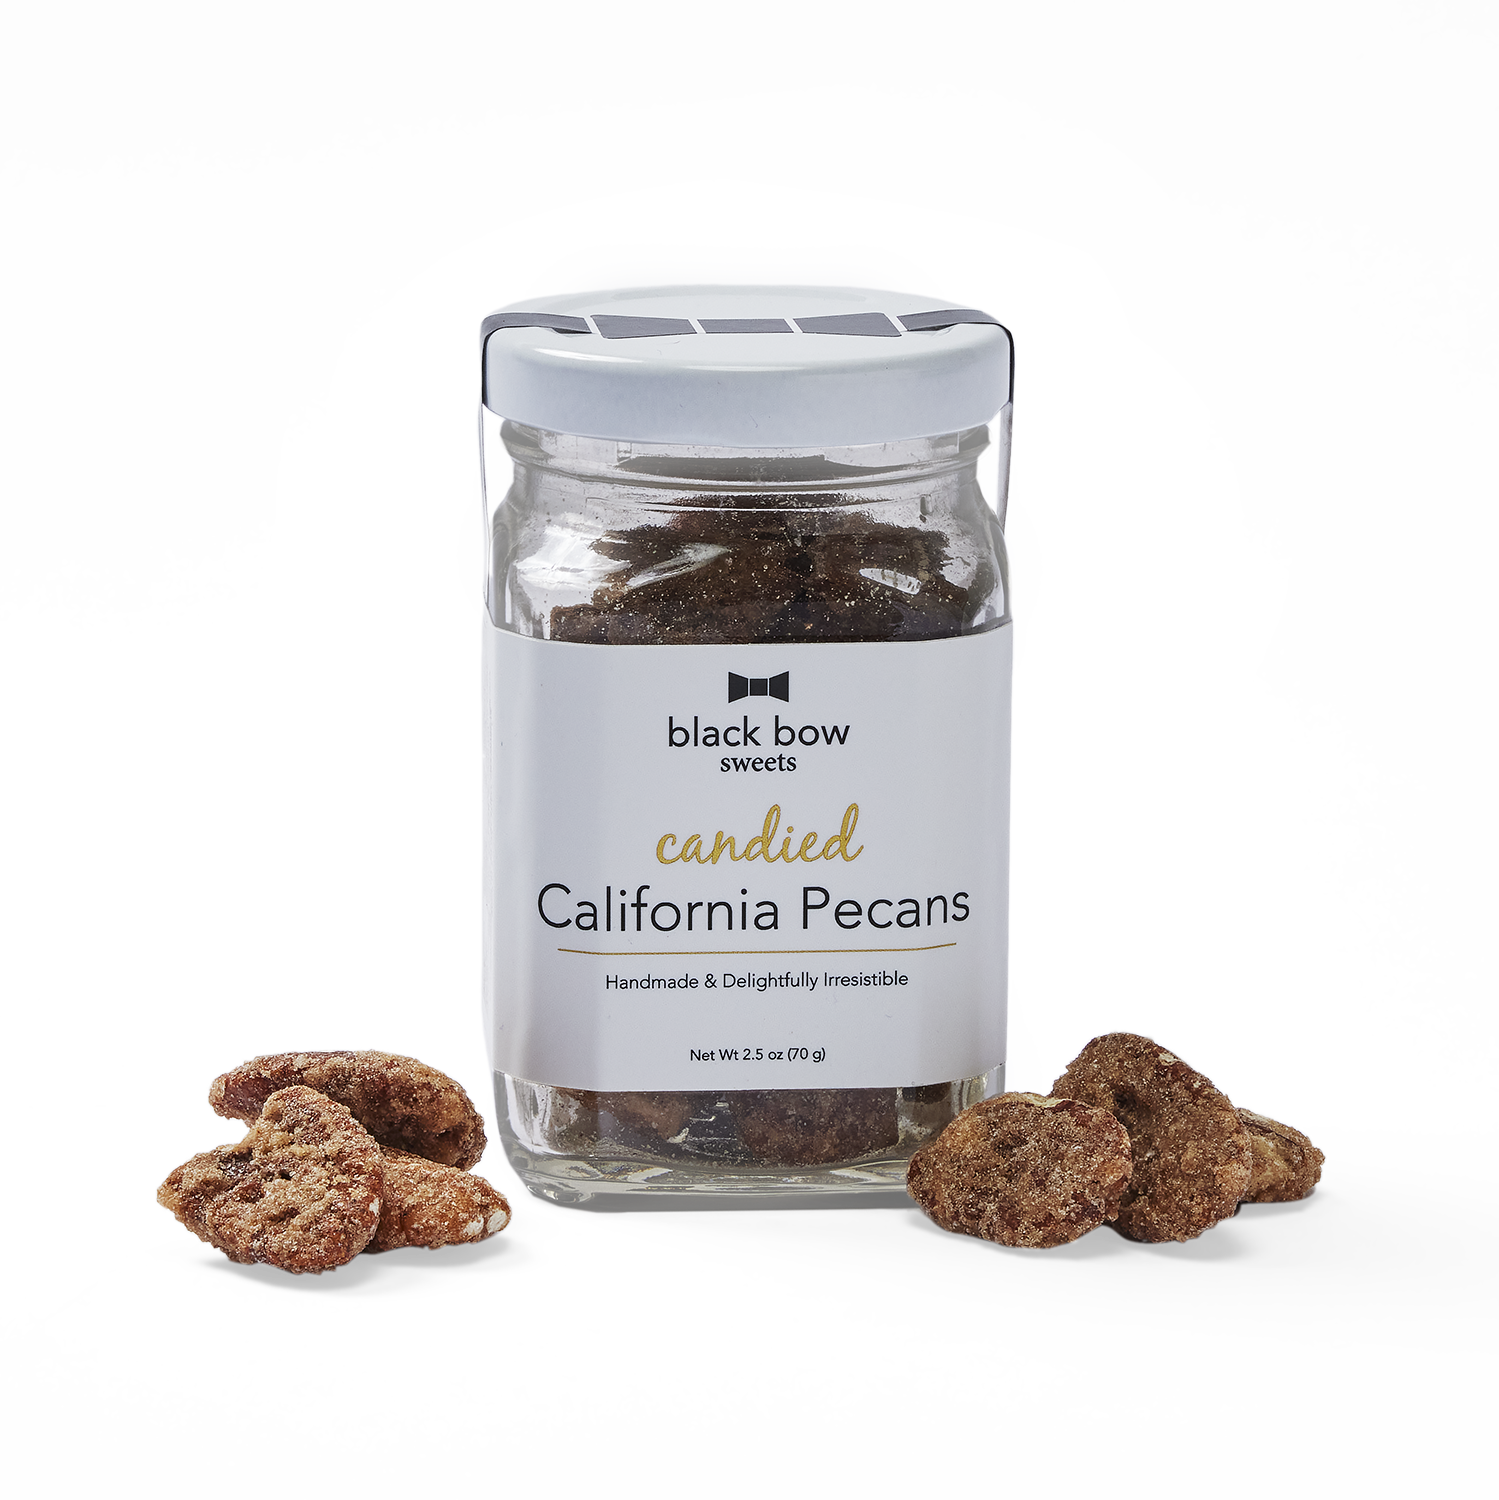 Black Bow Sweets, Candied California Pecans